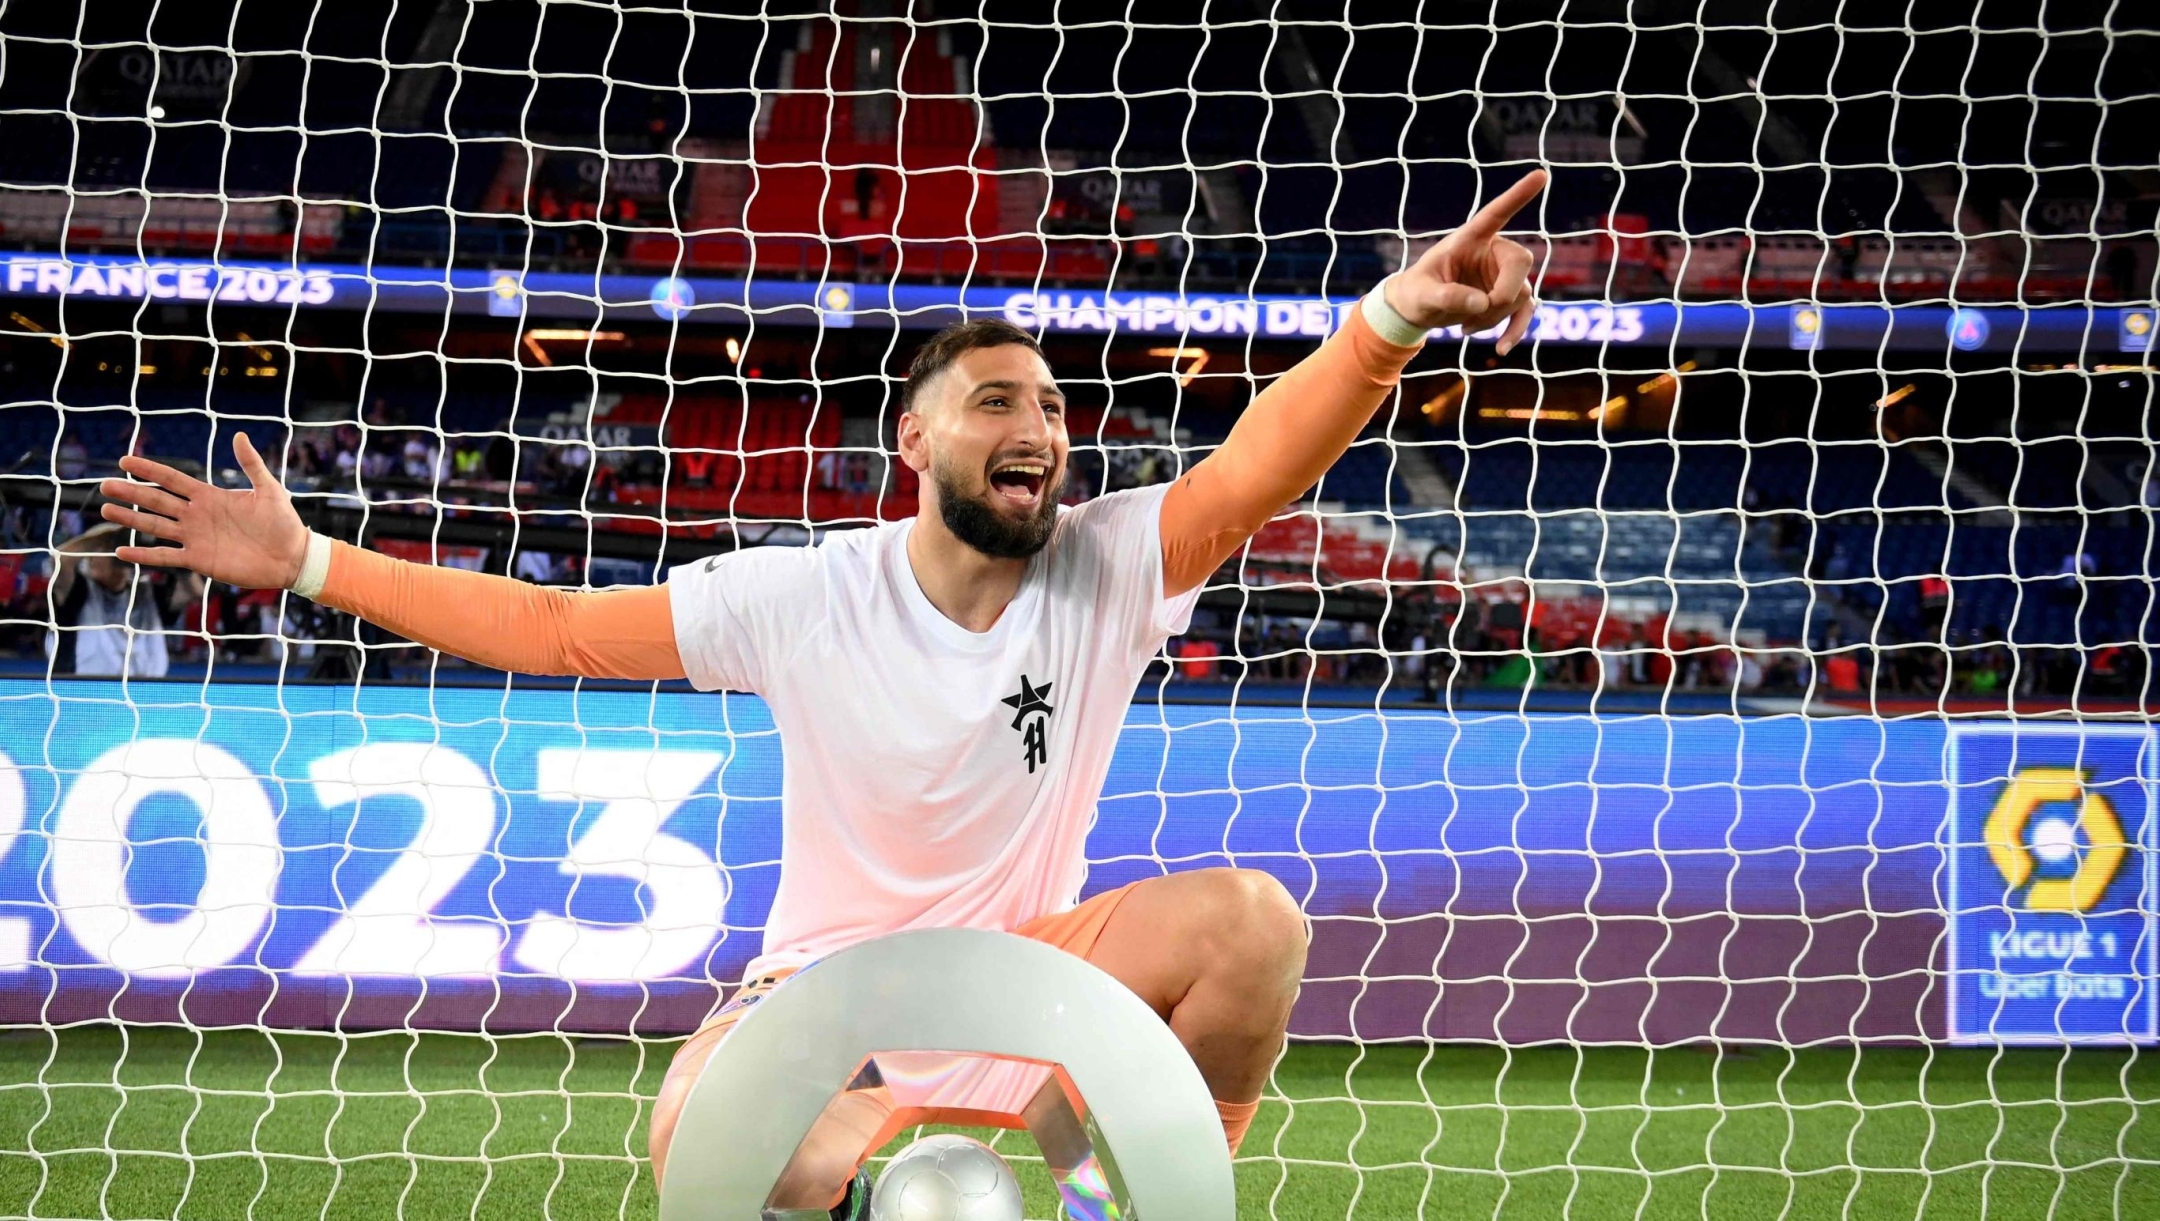 Paris Saint-Germain's Italian goalkeeper Gianluigi Donnarumma poses with the trophy during the 2022-2023 Ligue 1 championship trophy ceremony following the L1 football match between Paris Saint-Germain (PSG) and Clermont Foot 63 at the Parc des Princes Stadium in Paris on June 3, 2023. (Photo by FRANCK FIFE / POOL / AFP)